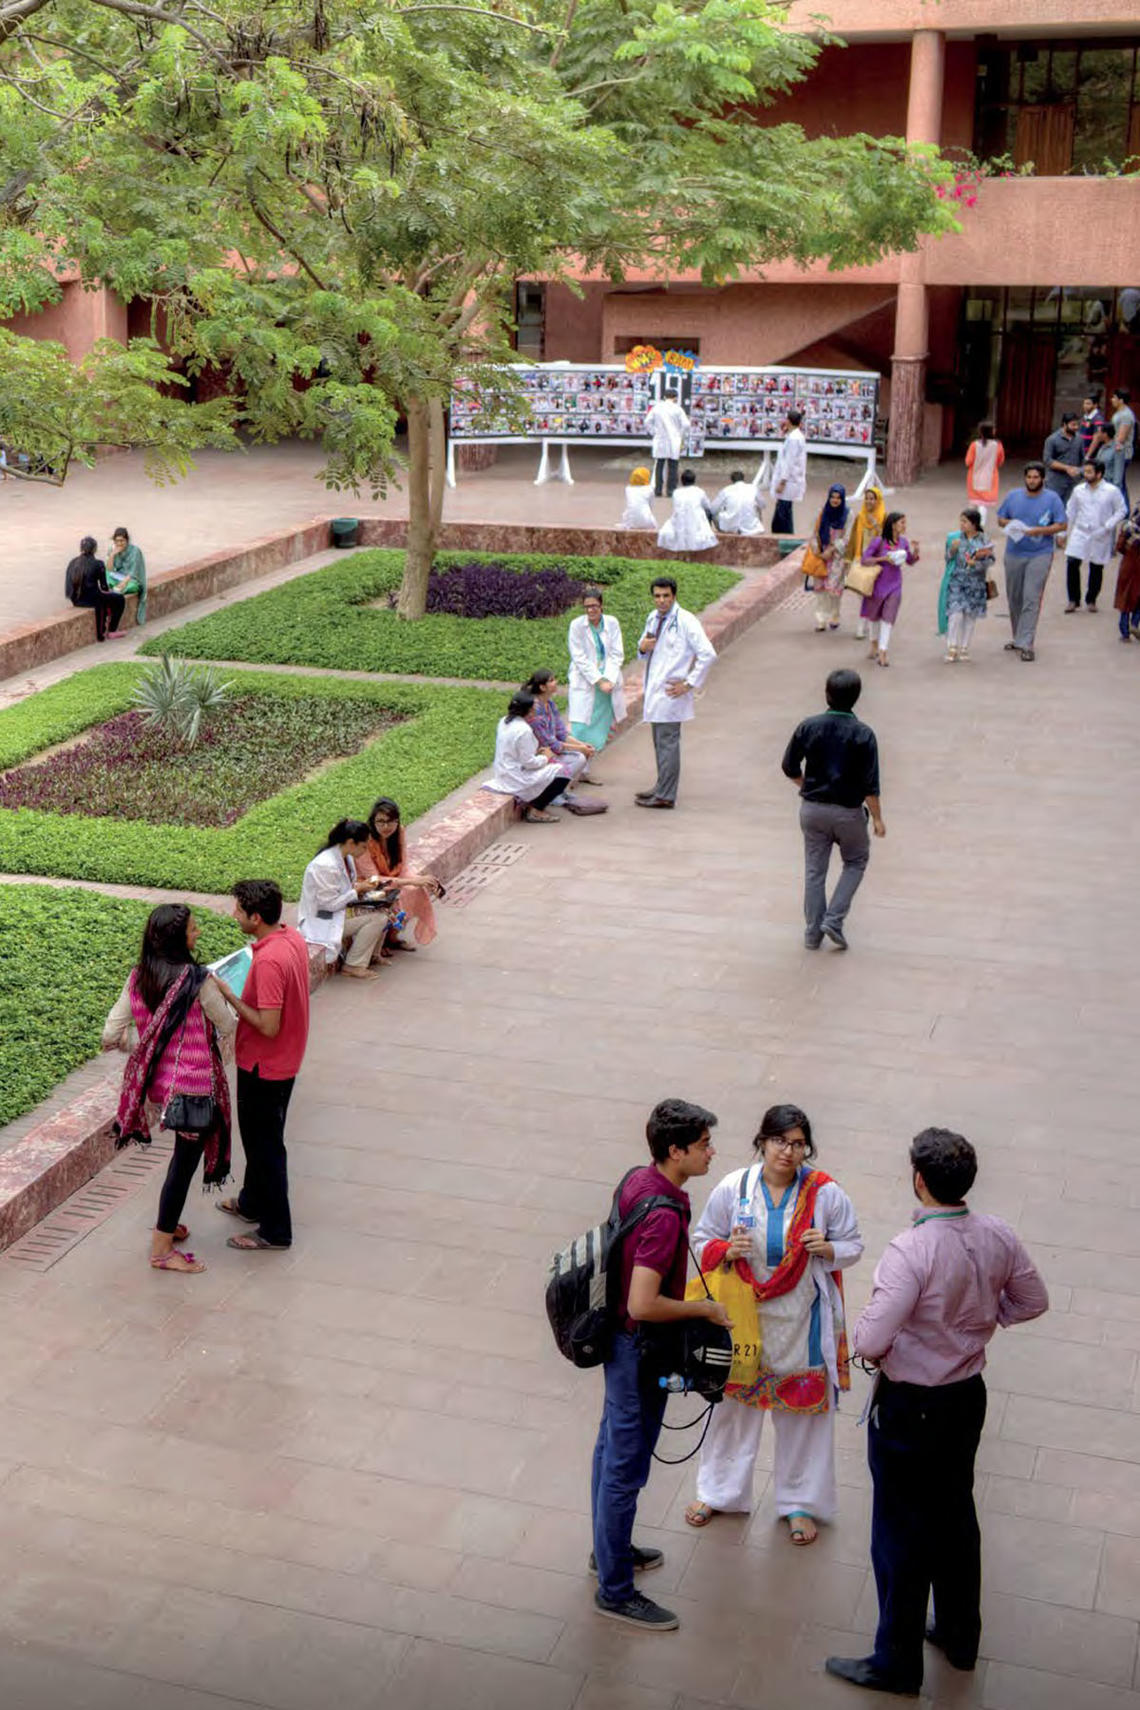 At Aga Khan University’s Stadium Road campus in Karachi, students gather in the courtyard of the Medical College between classes and rounds at the Aga Khan University Hospital.